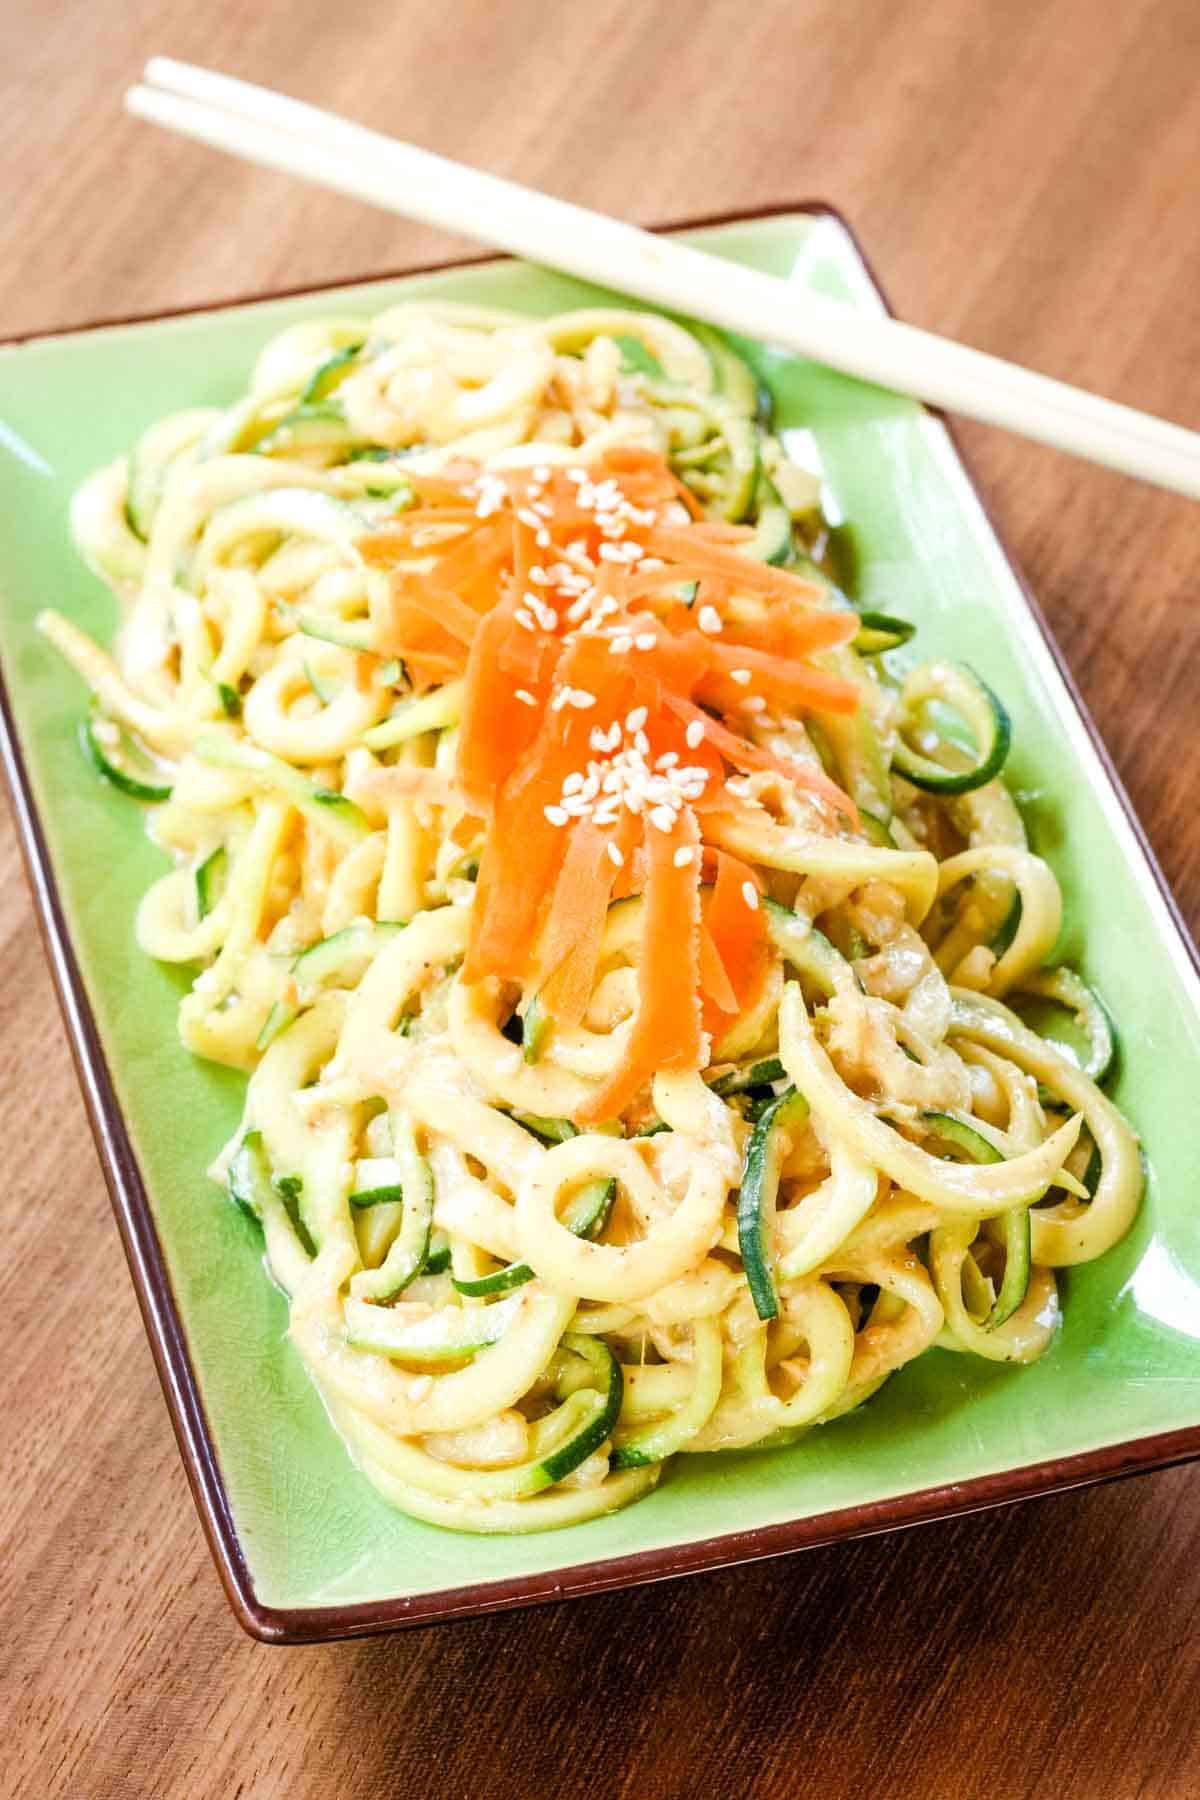 Sesame zoodles garnished with shredded carrots and sesame seed son a green plate with chopsticks on the side.